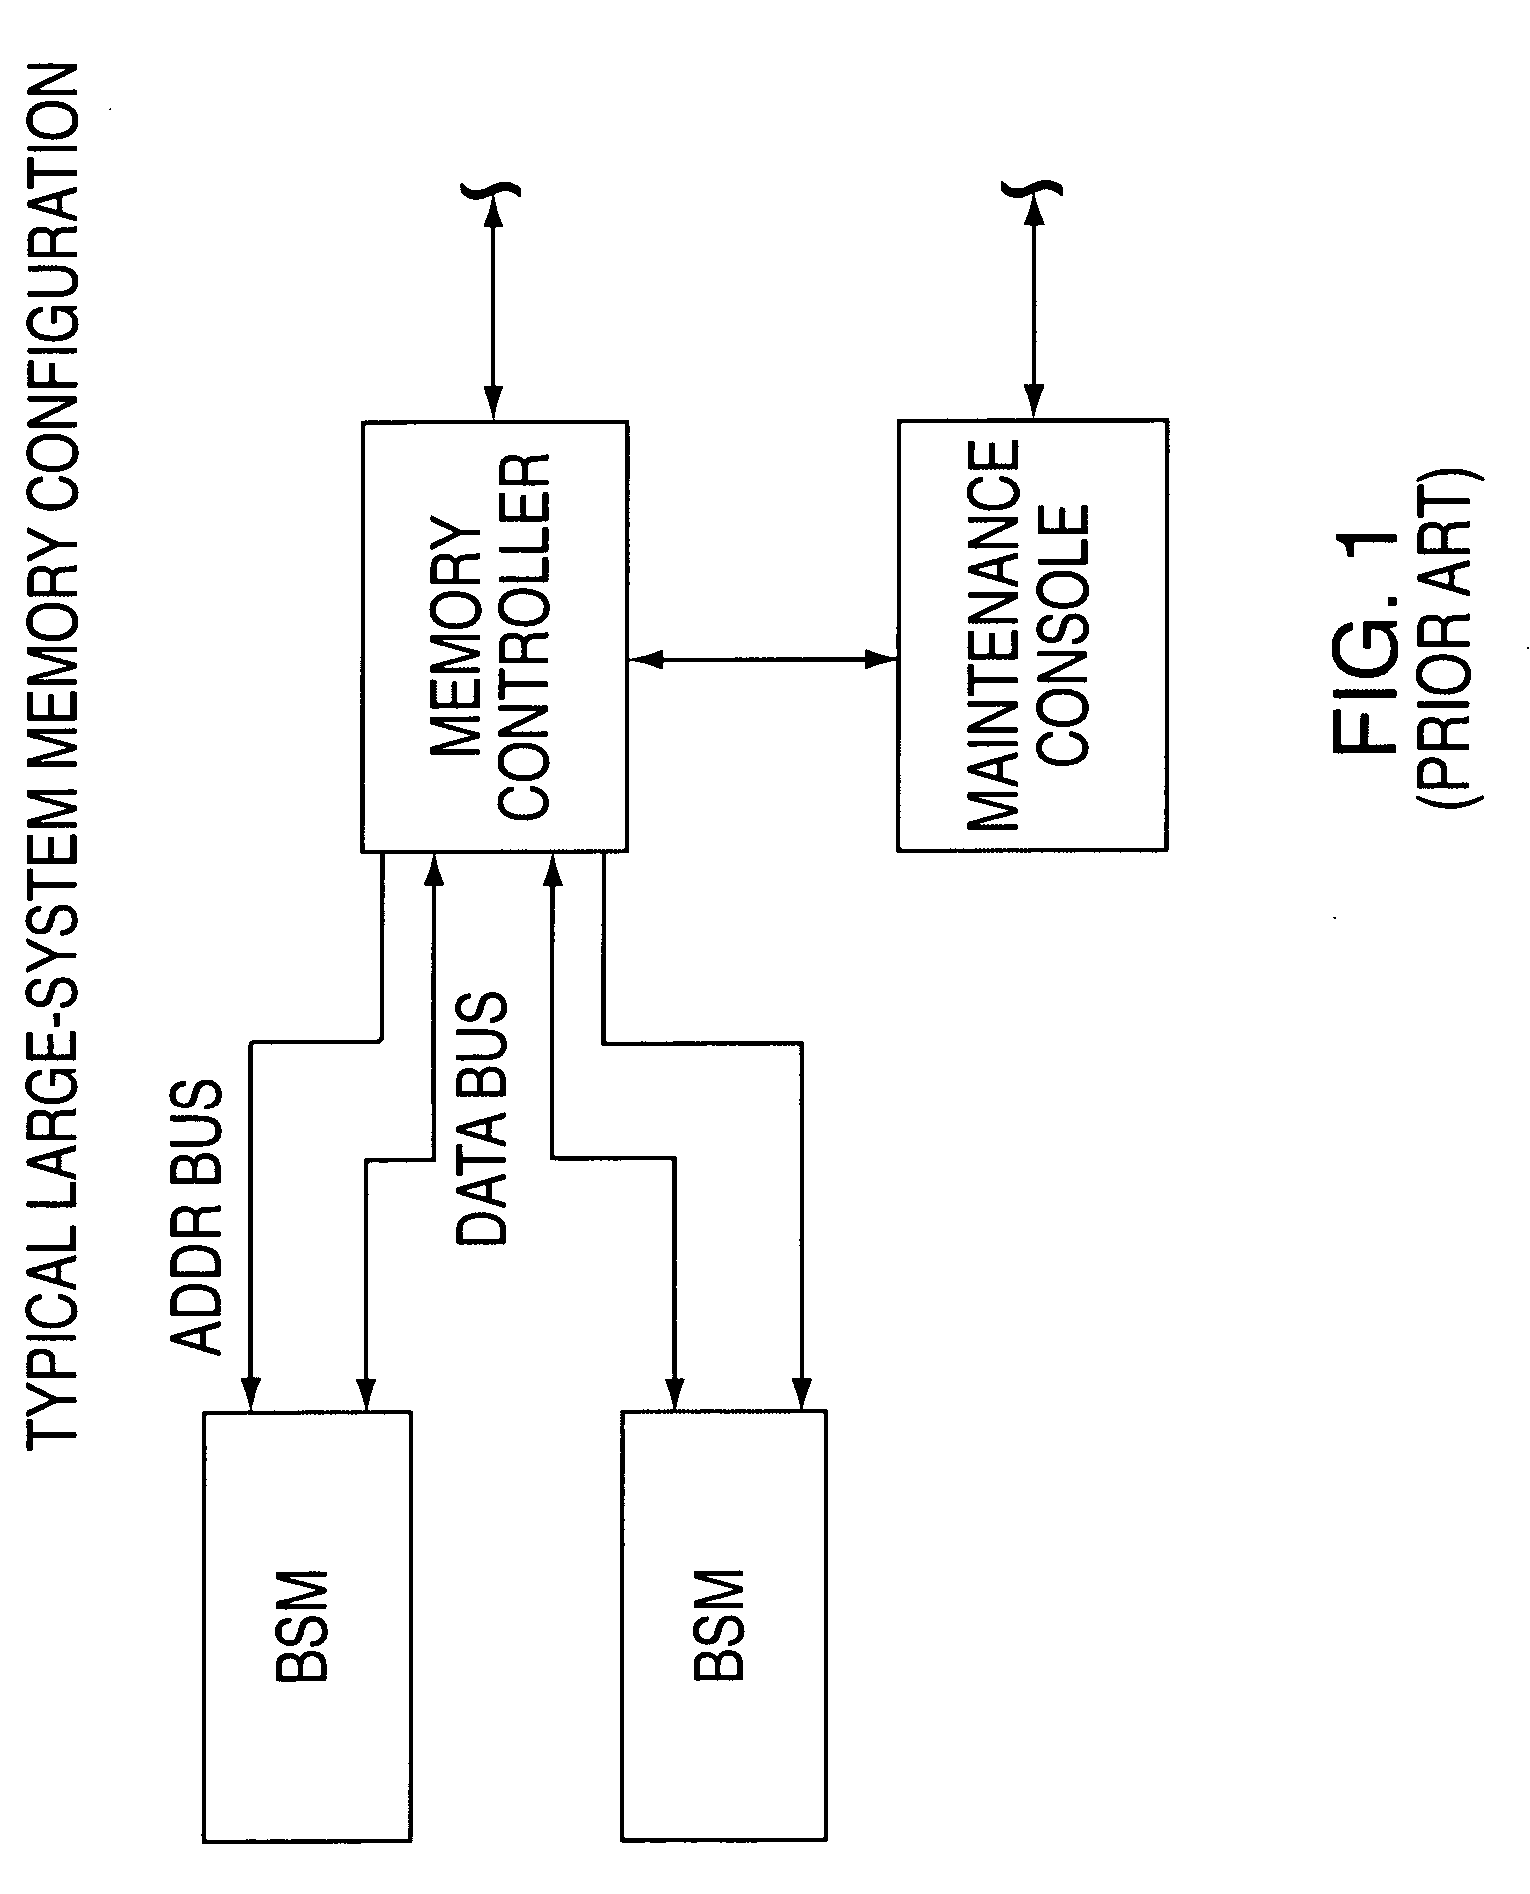 System, method and storage medium for providing a bus speed multiplier